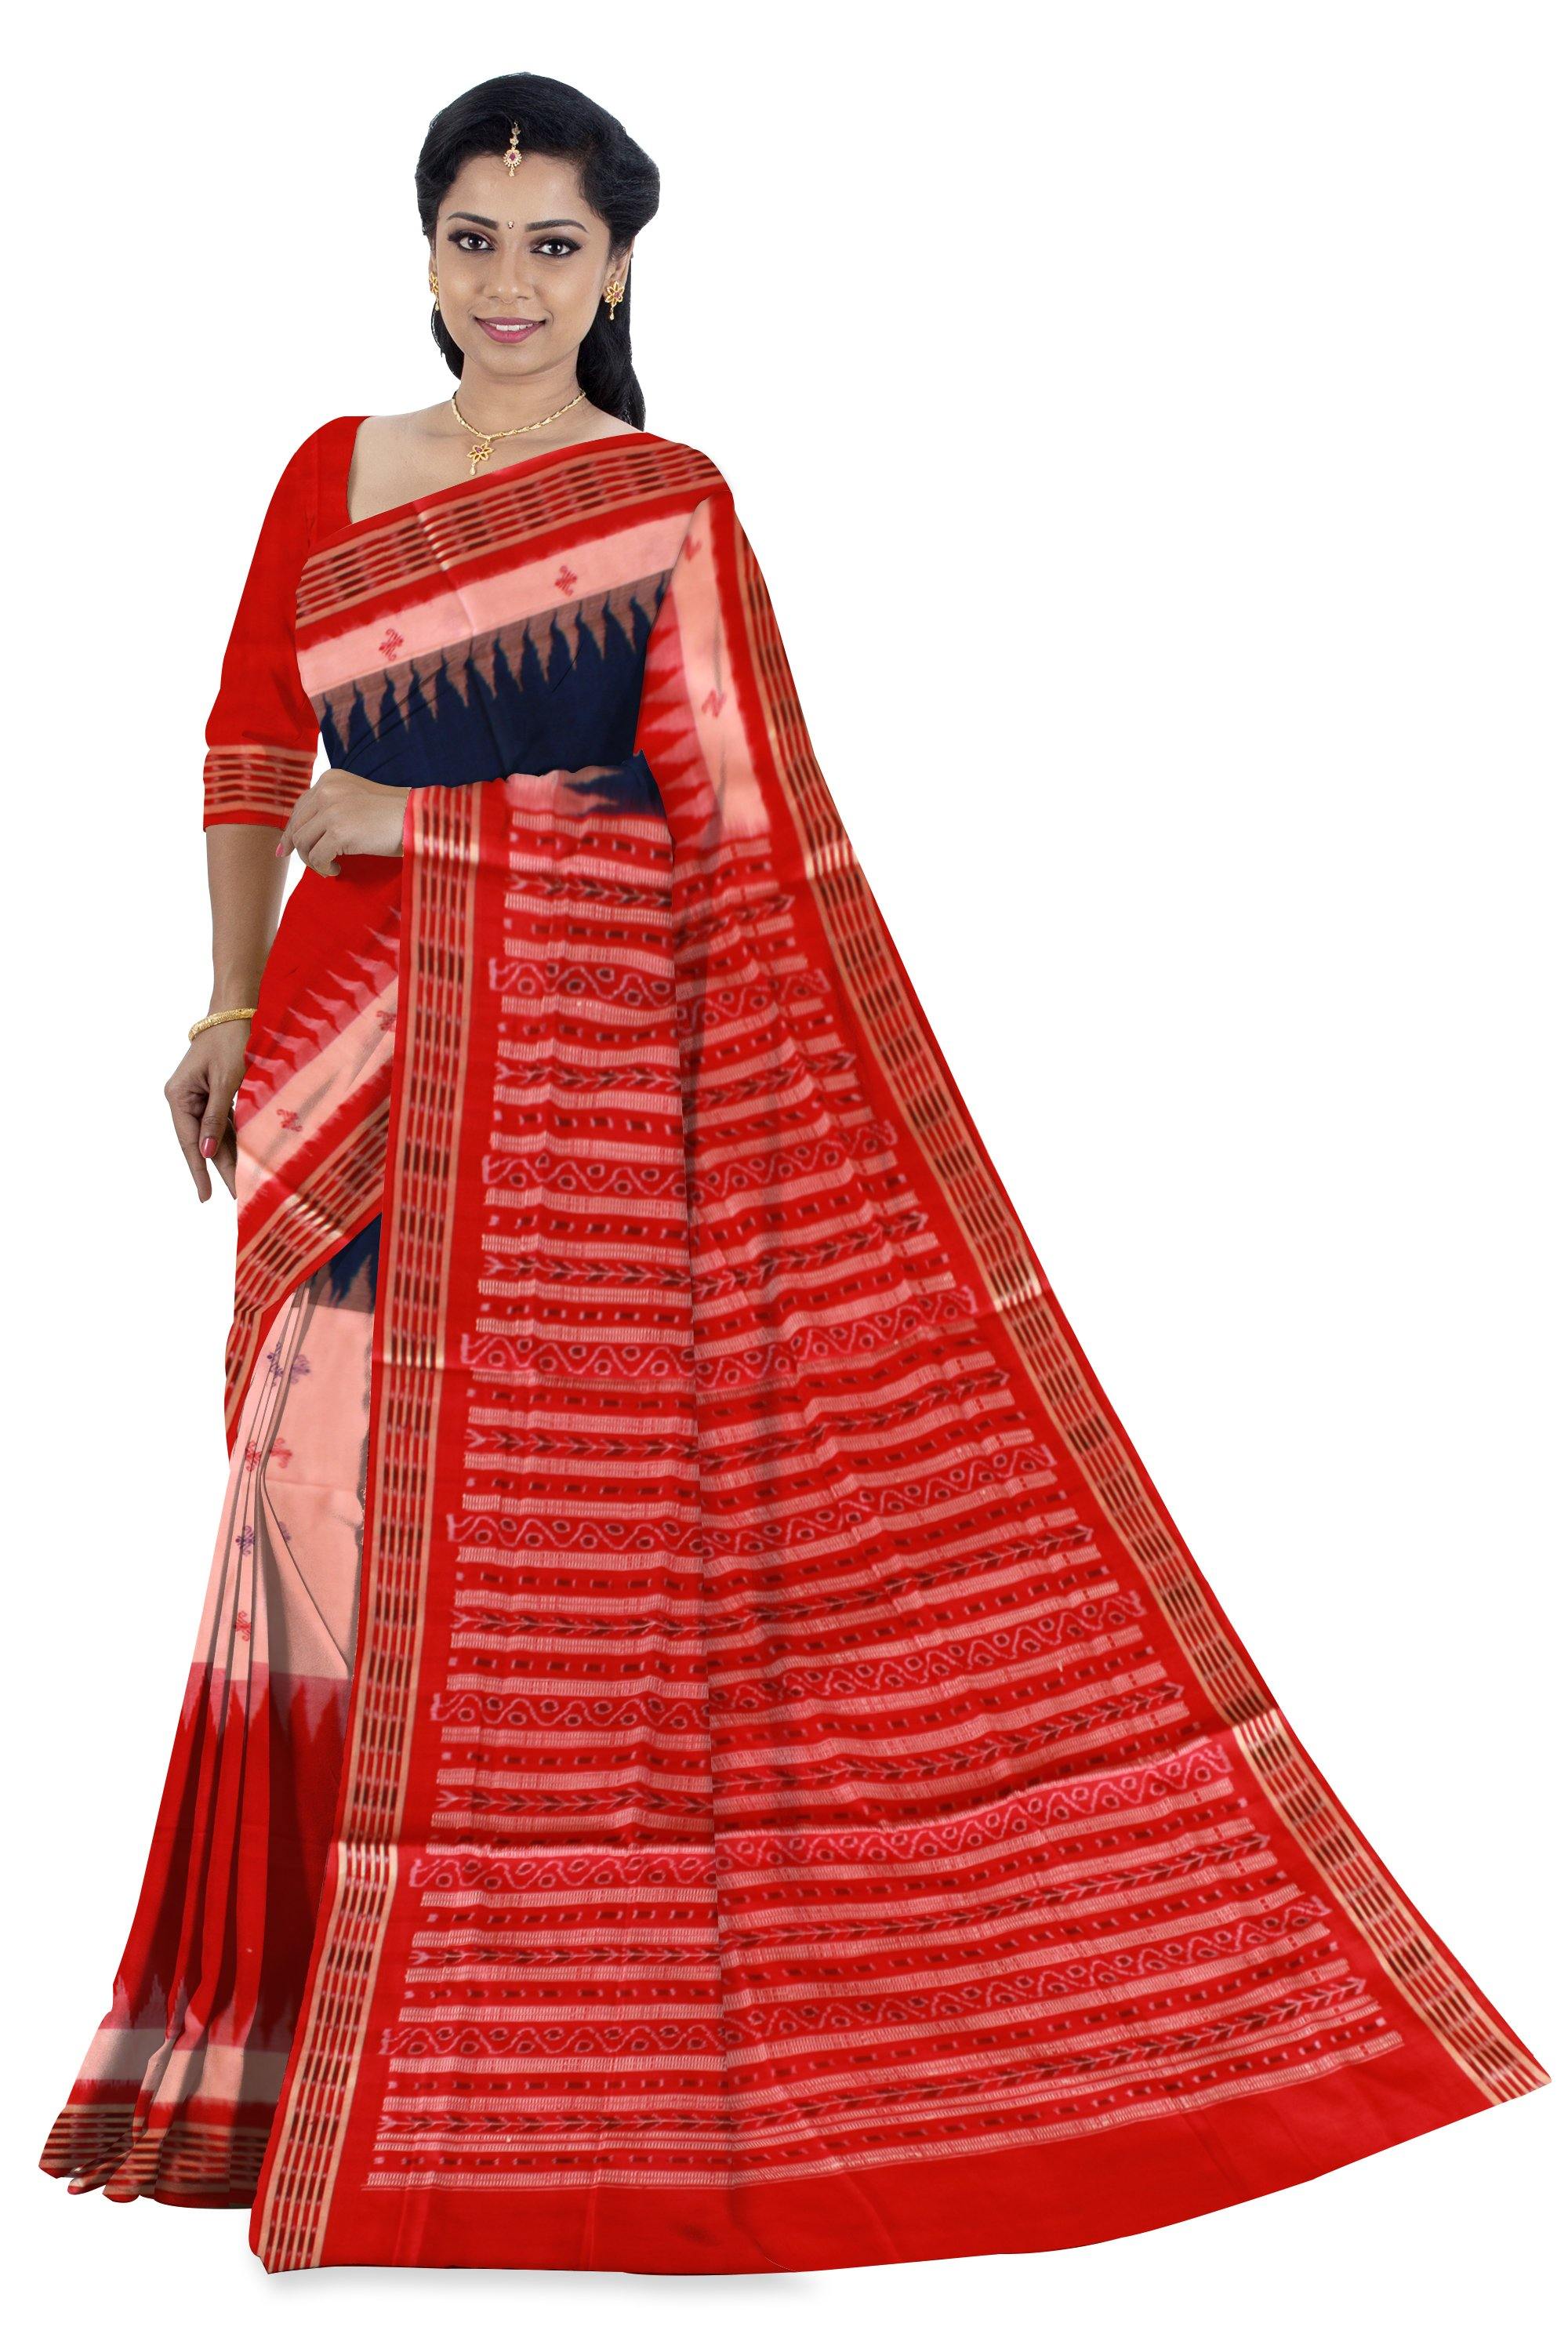 3D design Samablpuri cotton saree in red, pink and blue color. Available with blouse piece. - Koshali Arts & Crafts Enterprise